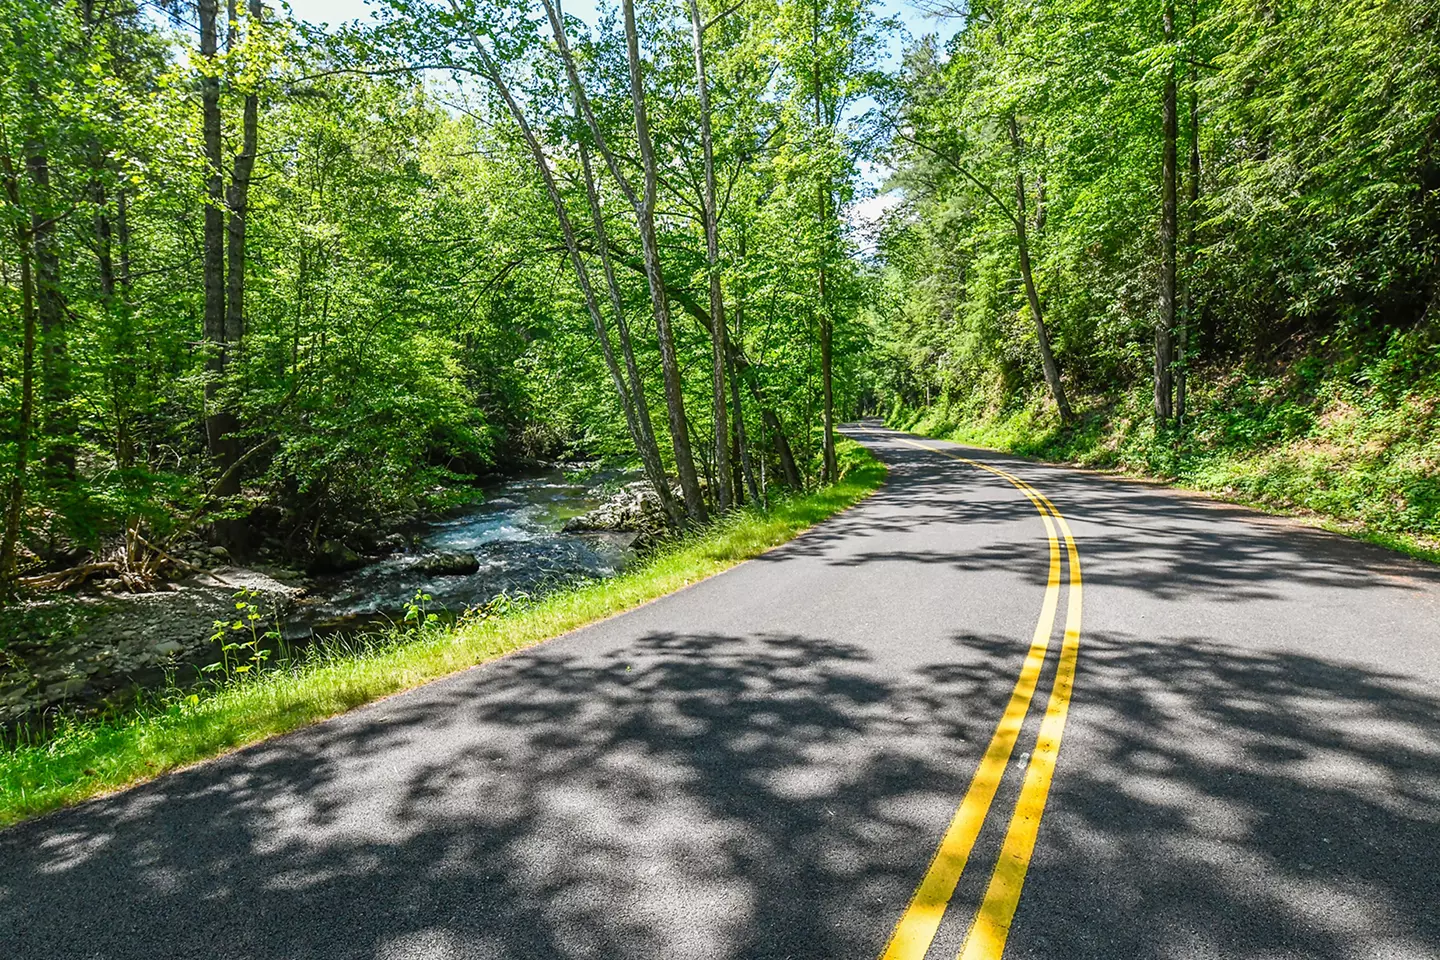 Two lane winding road through the Tremont area of the GSMNP. Hike all day through the abandoned town and discover new things.